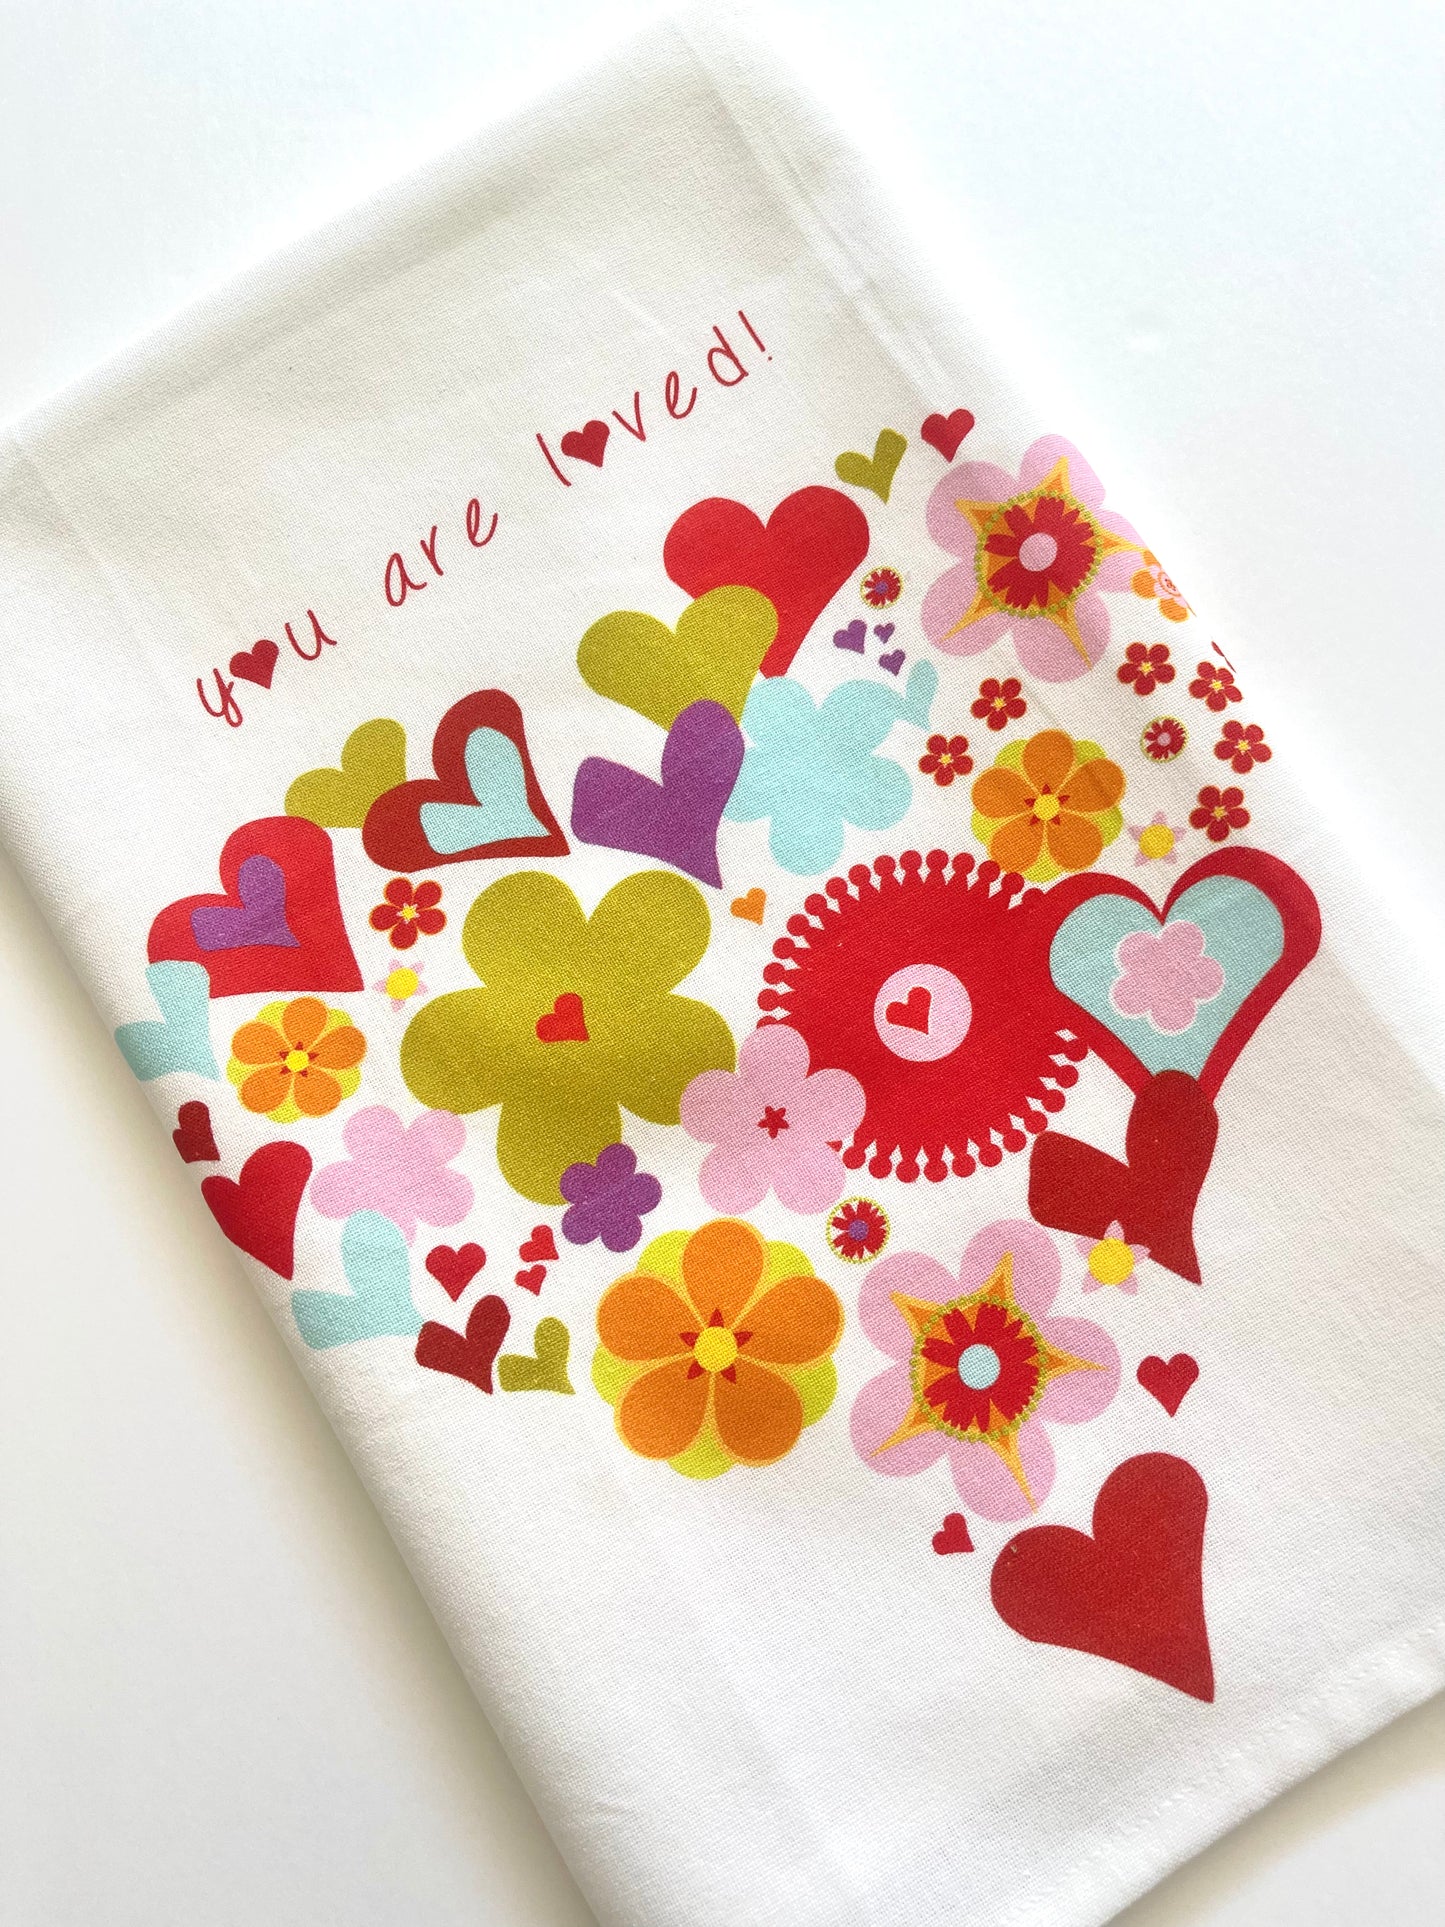 "You Are Loved"  - Kitchen Towel